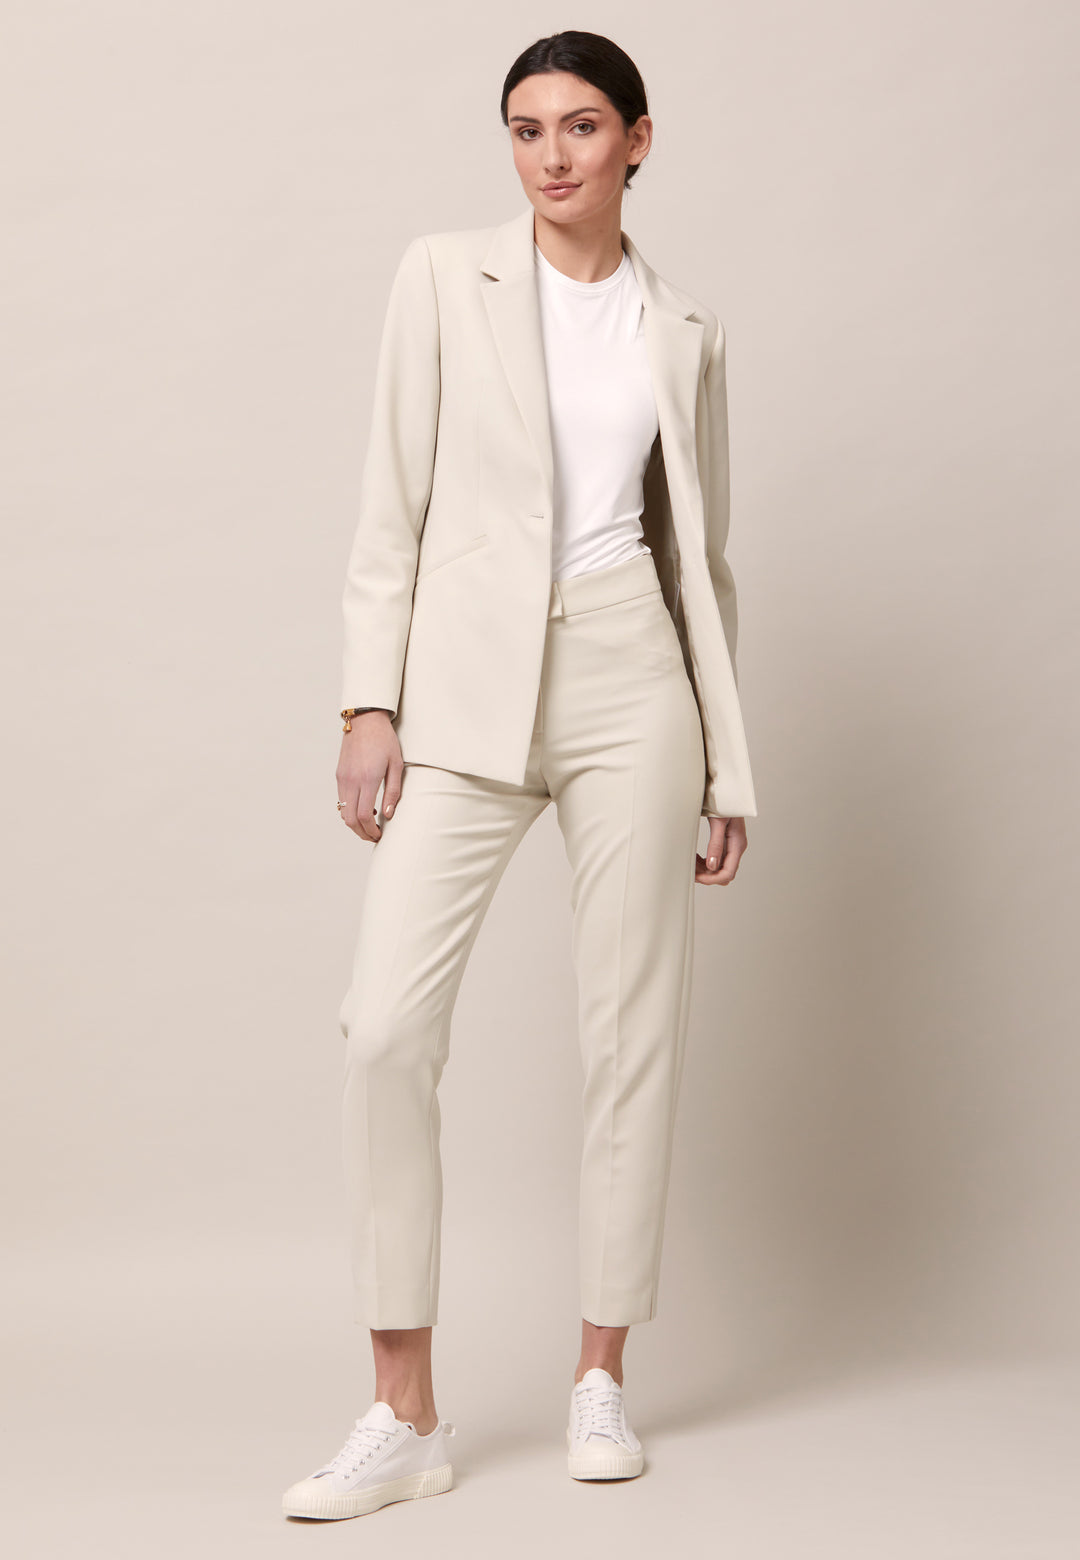 Investment-worthy, neat narrow-leg trouser with a hint of stretch. A wardrobe staple and HMcA classic. This fabric is made with a hint of elastane to ensure comfort and ease of movement. Shown here in a sophisticated ivory tone. Pair with a simple tee for workwear appeal or elevate your look with the coordinating blazer.